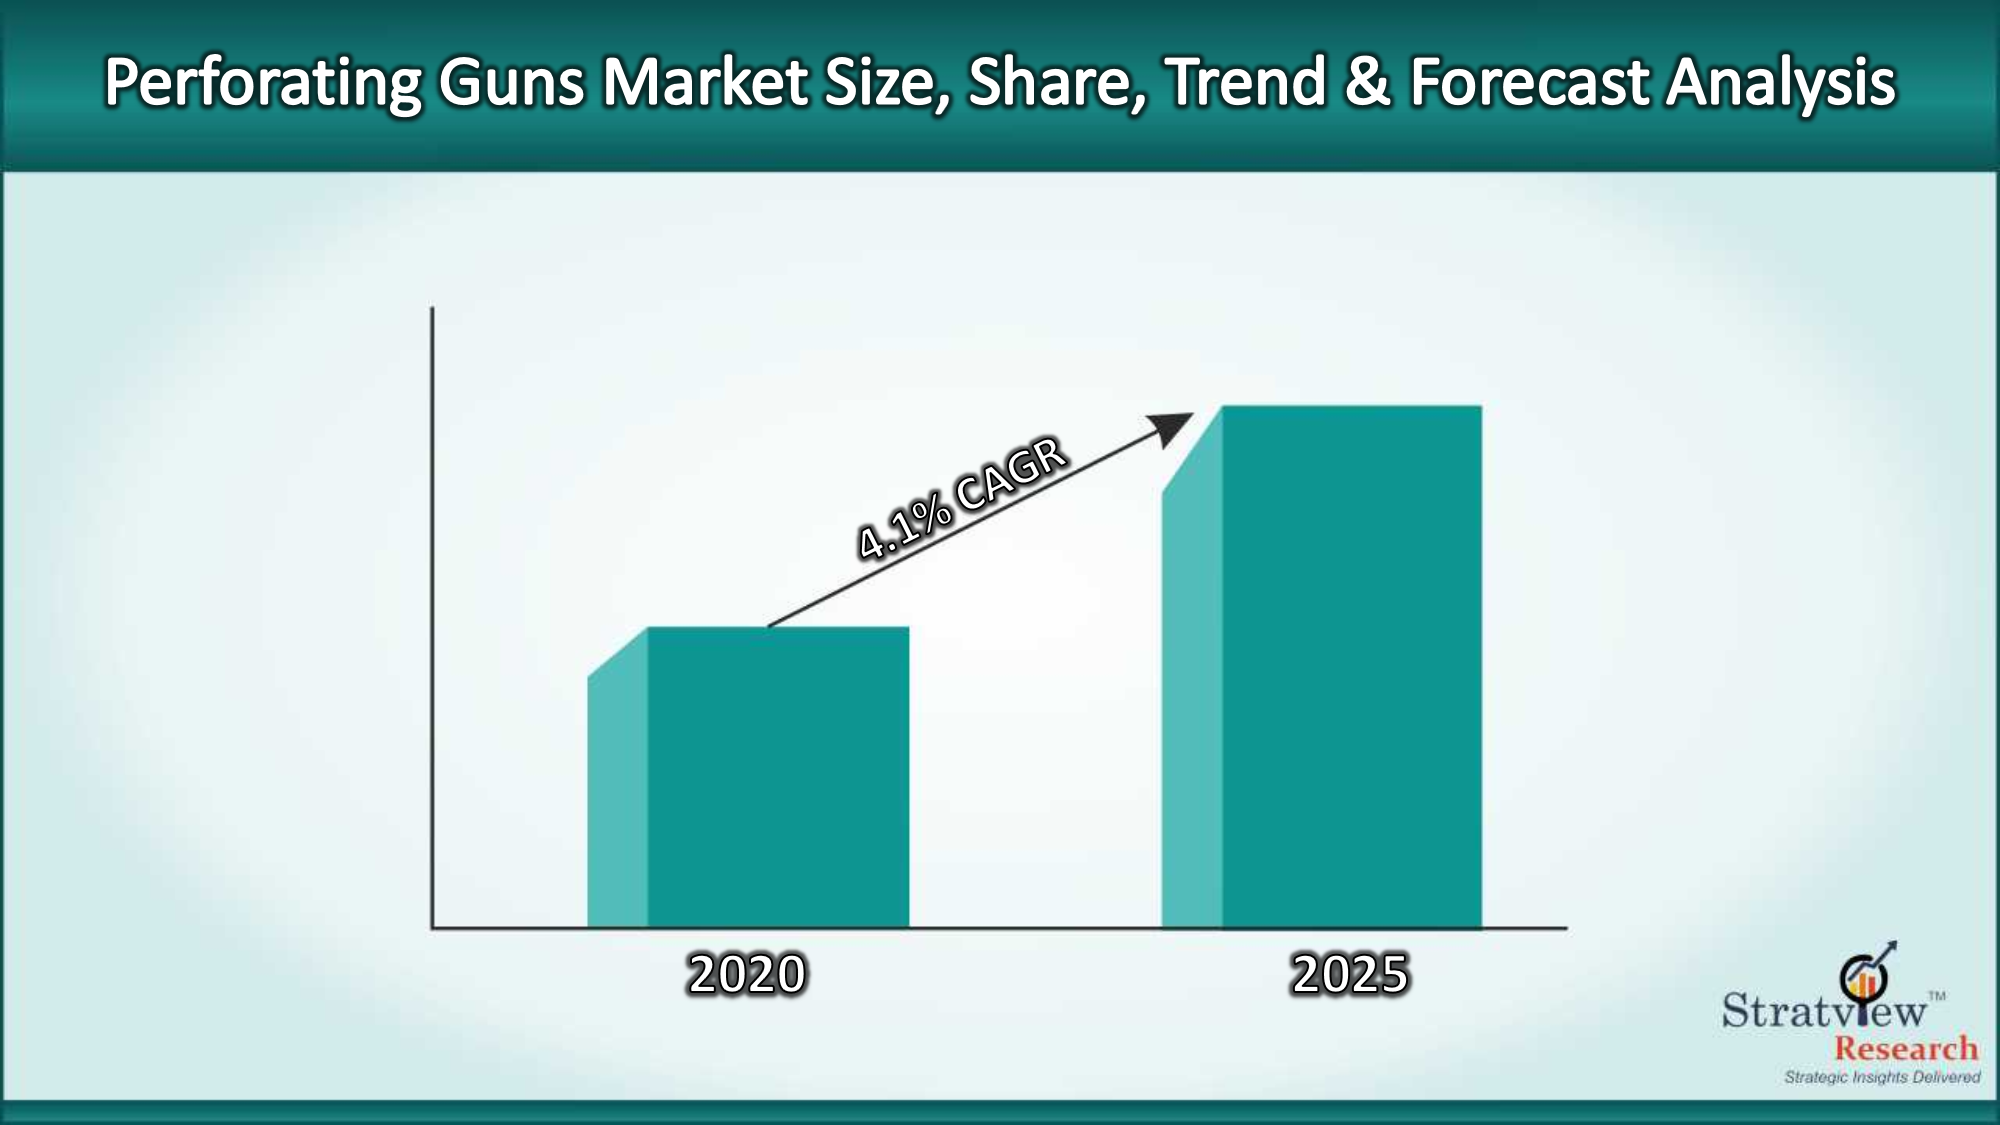 Perforating Guns Market to experience a healthy CAGR of 4.1%